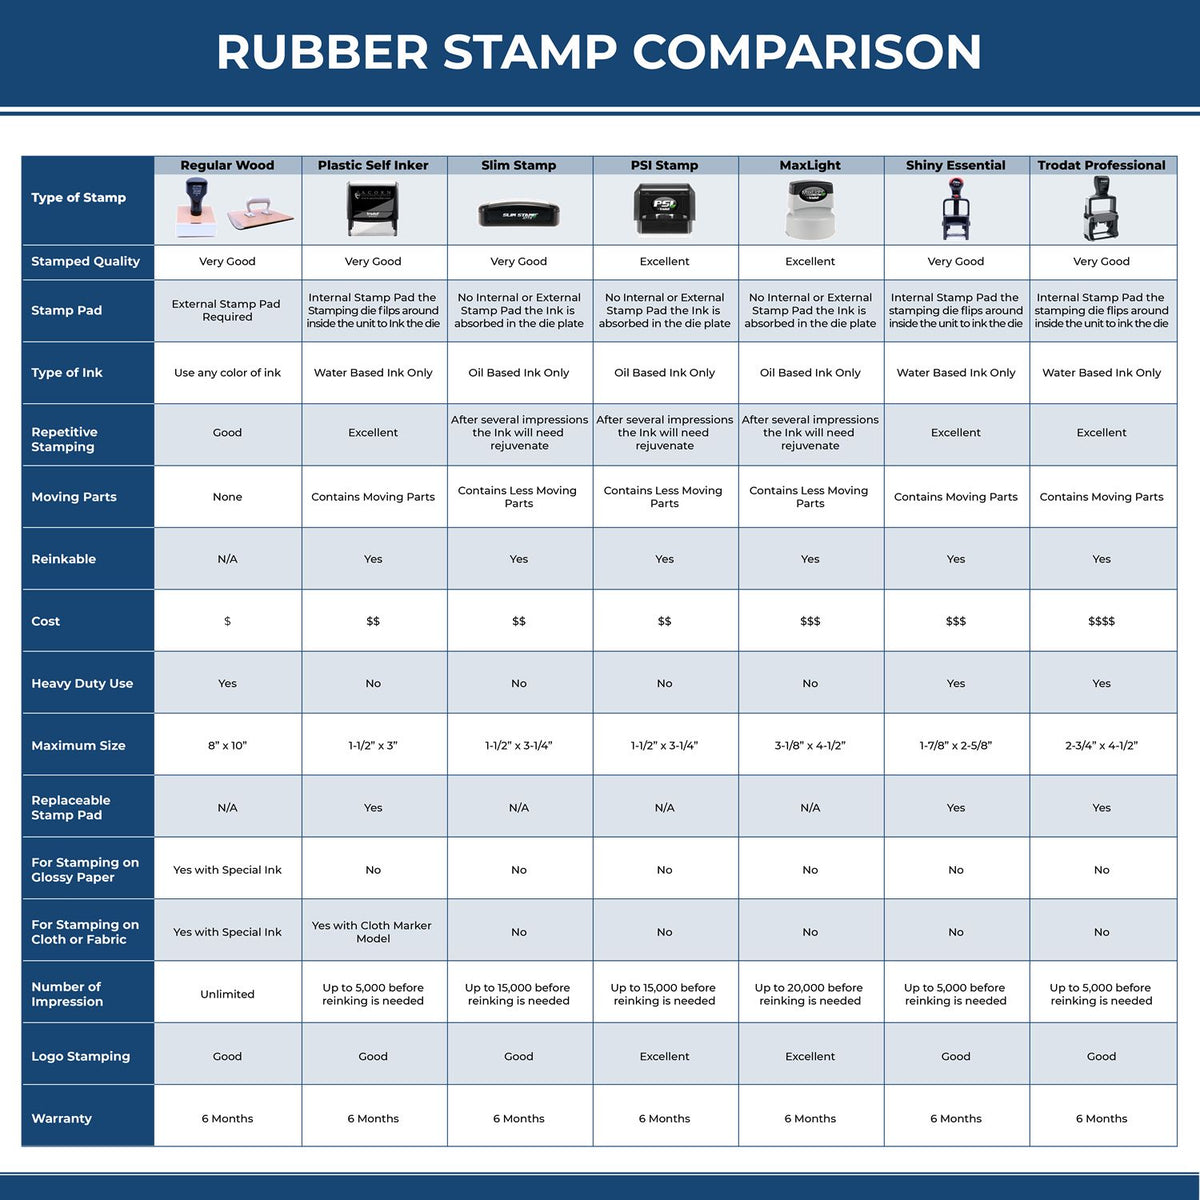 A comparison chart for the different types of mount models available for the MaxLight Premium Pre-Inked Kansas State Seal Notarial Stamp.